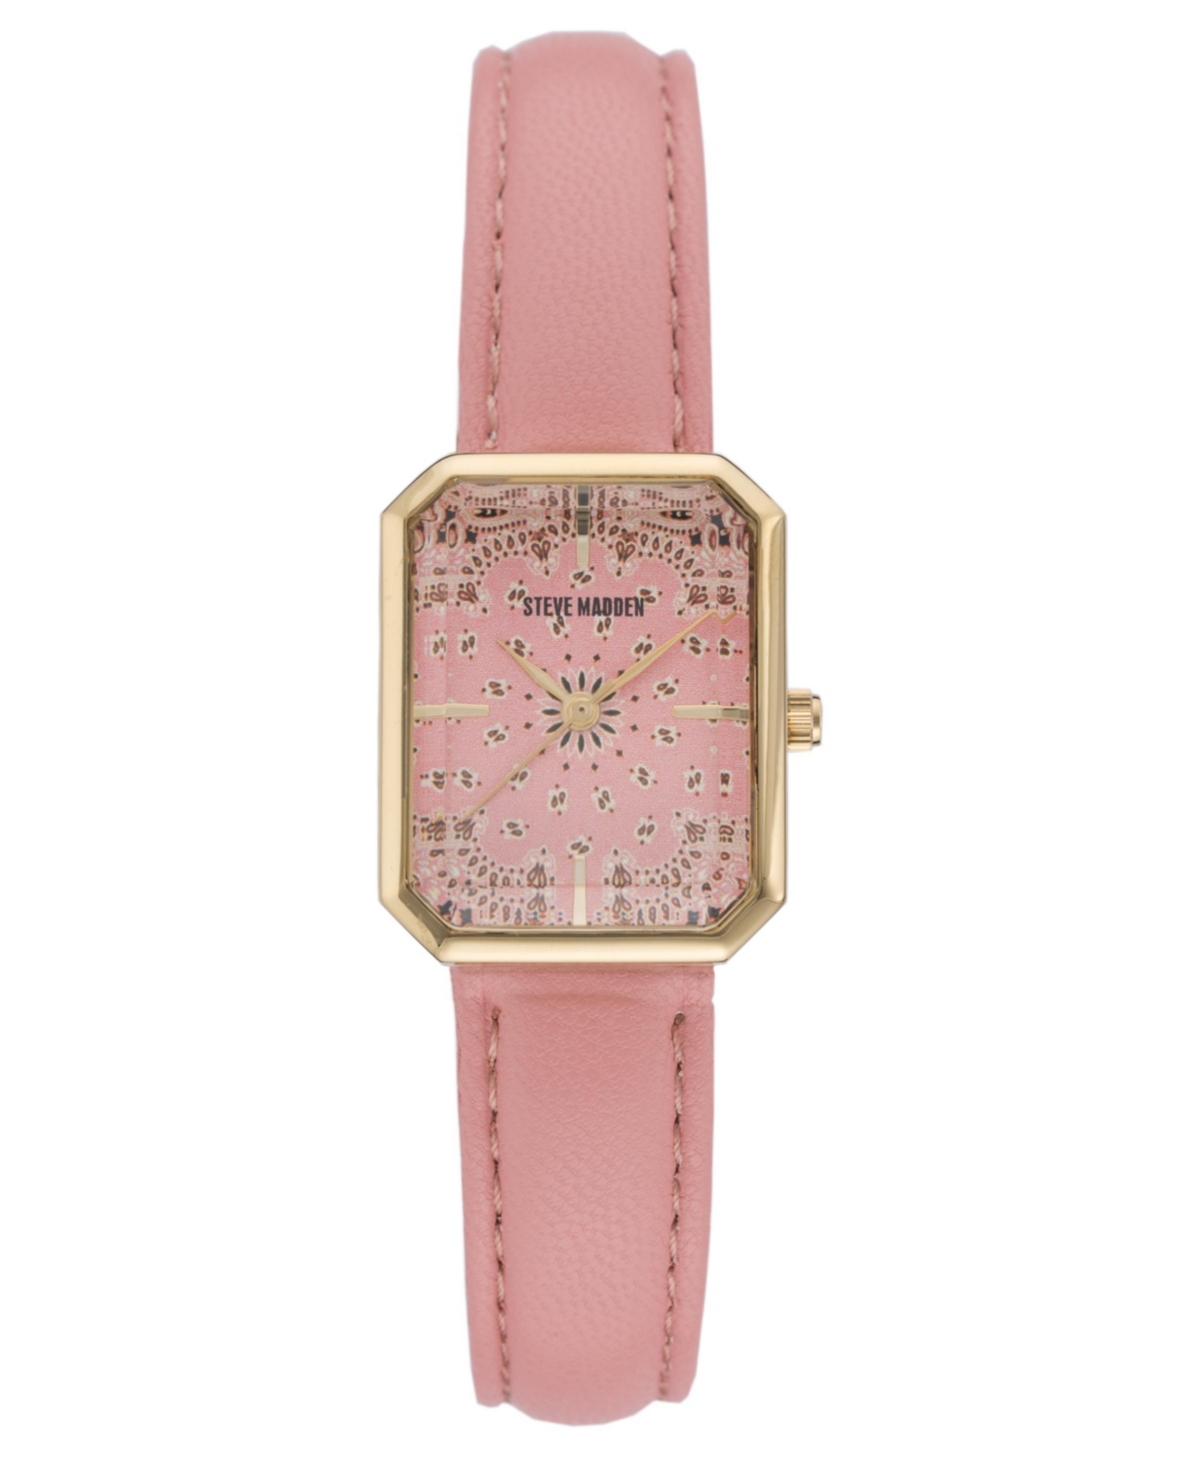 Women's Pink Polyurethane Leather Strap with Stitching Watch, 22X28mm - Pink